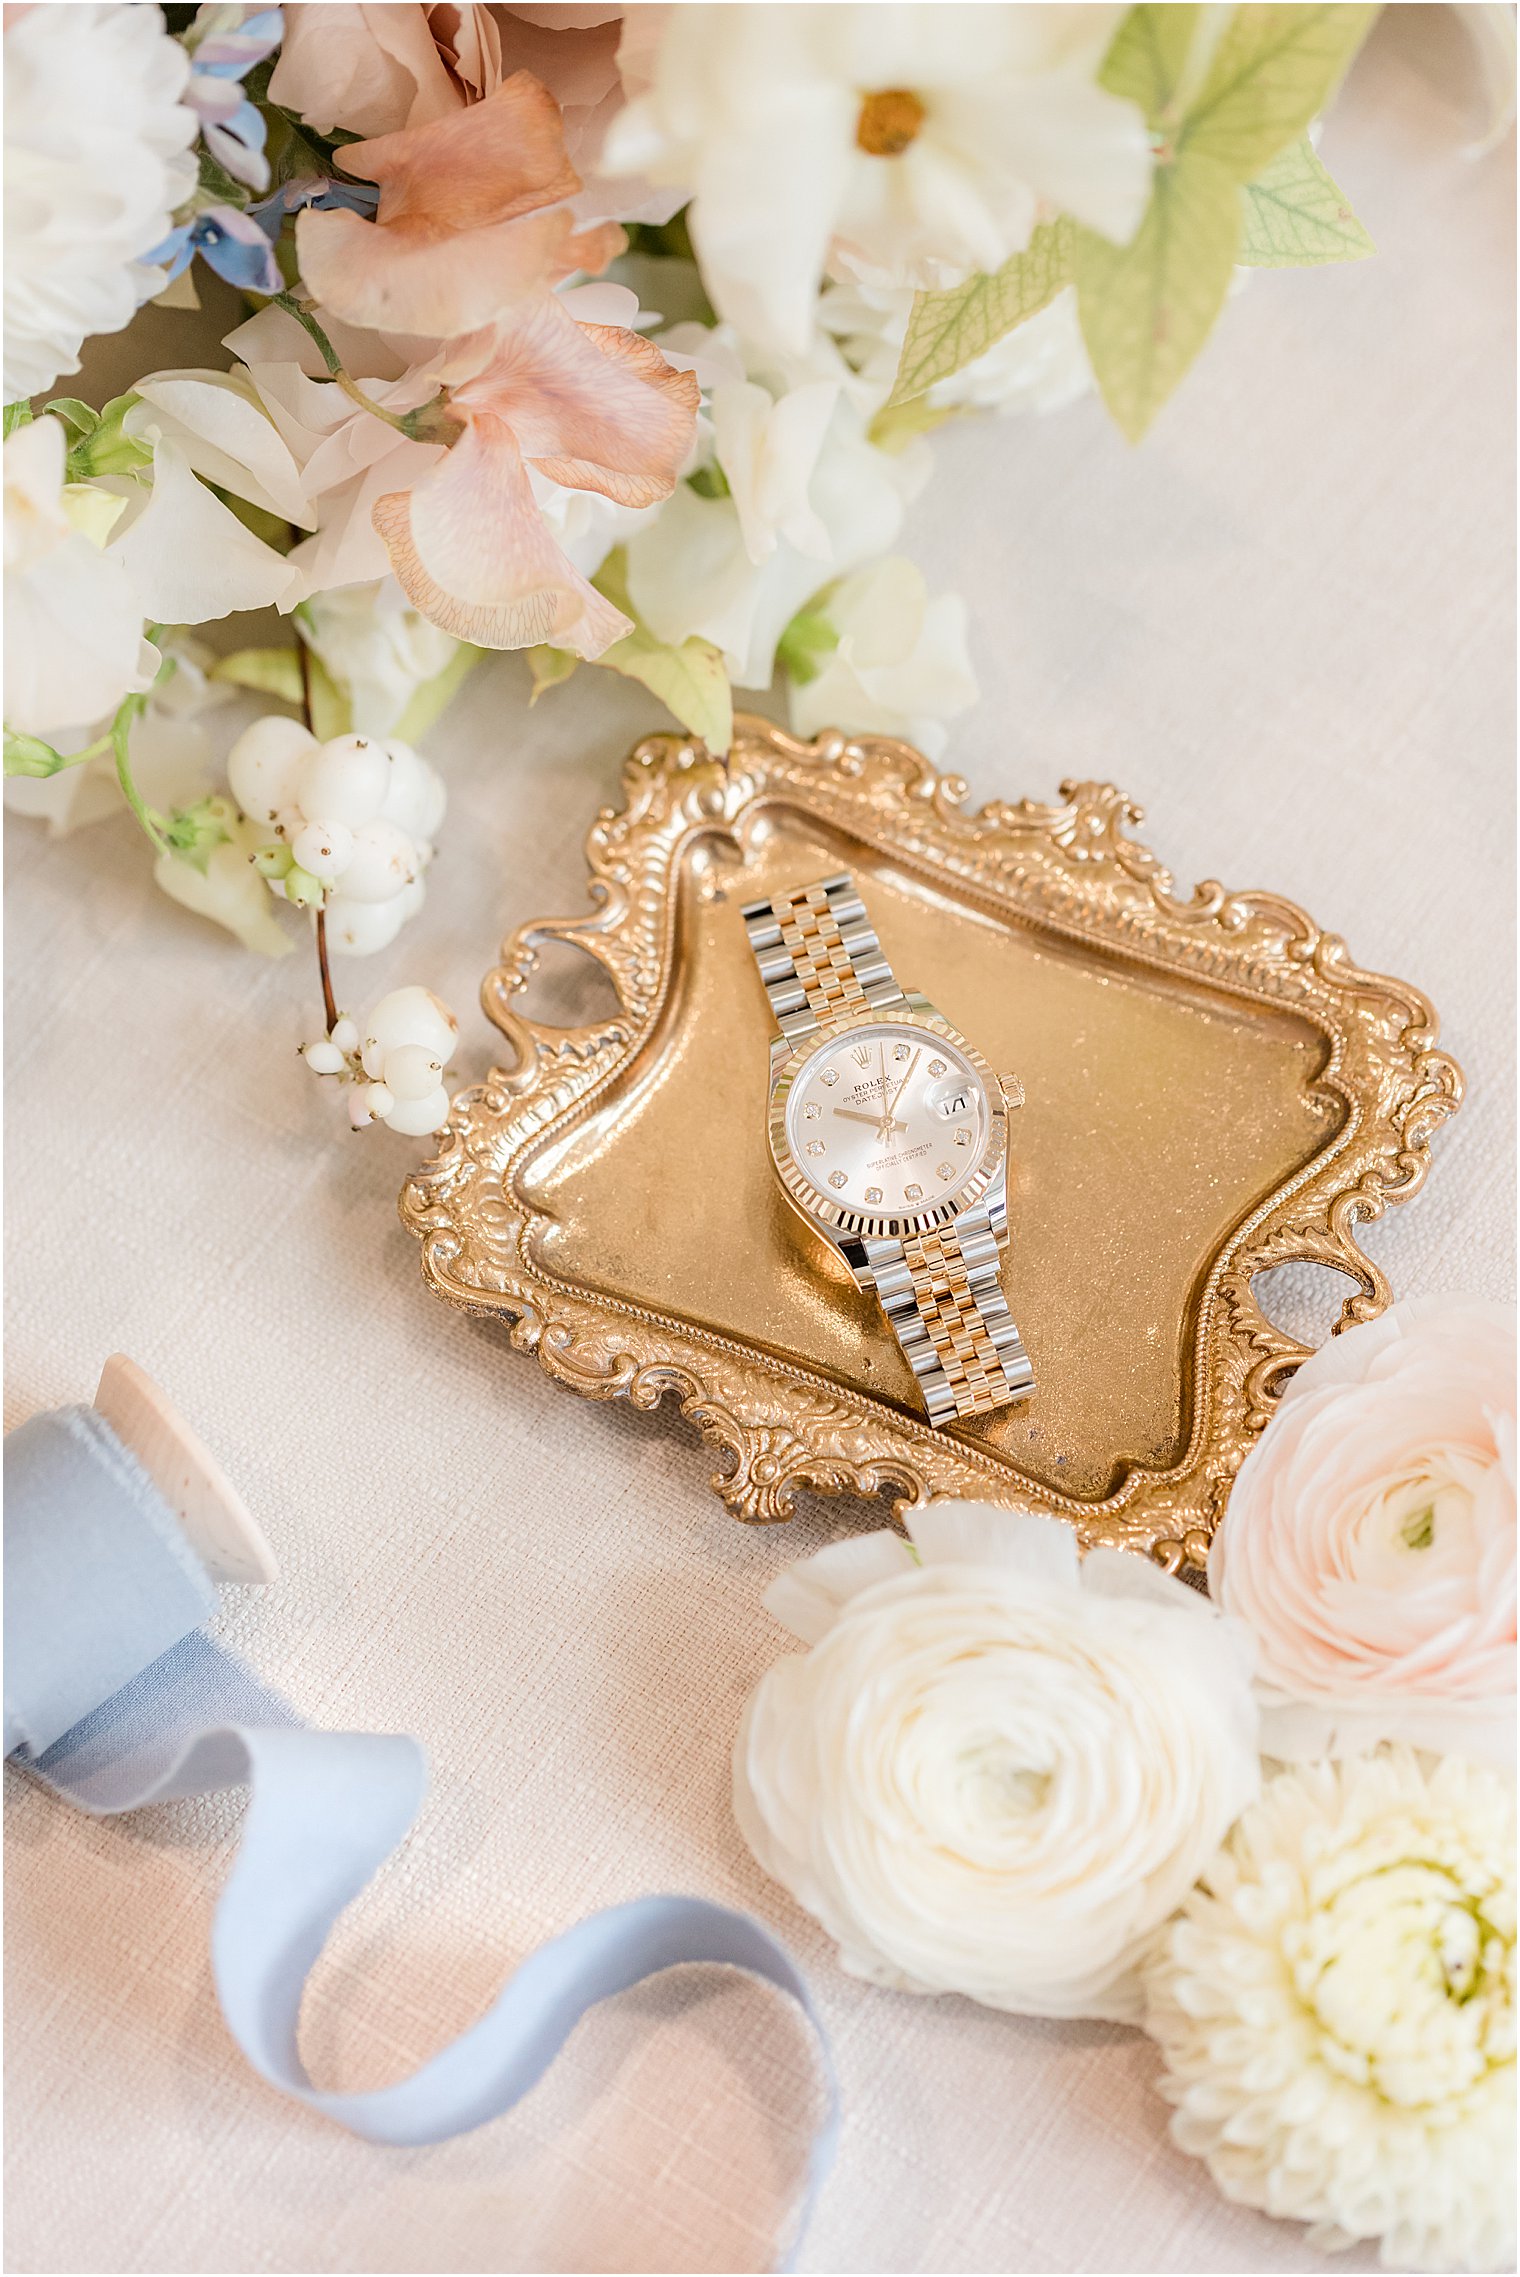 watch sits on gold tray in New Jersey for fall wedding